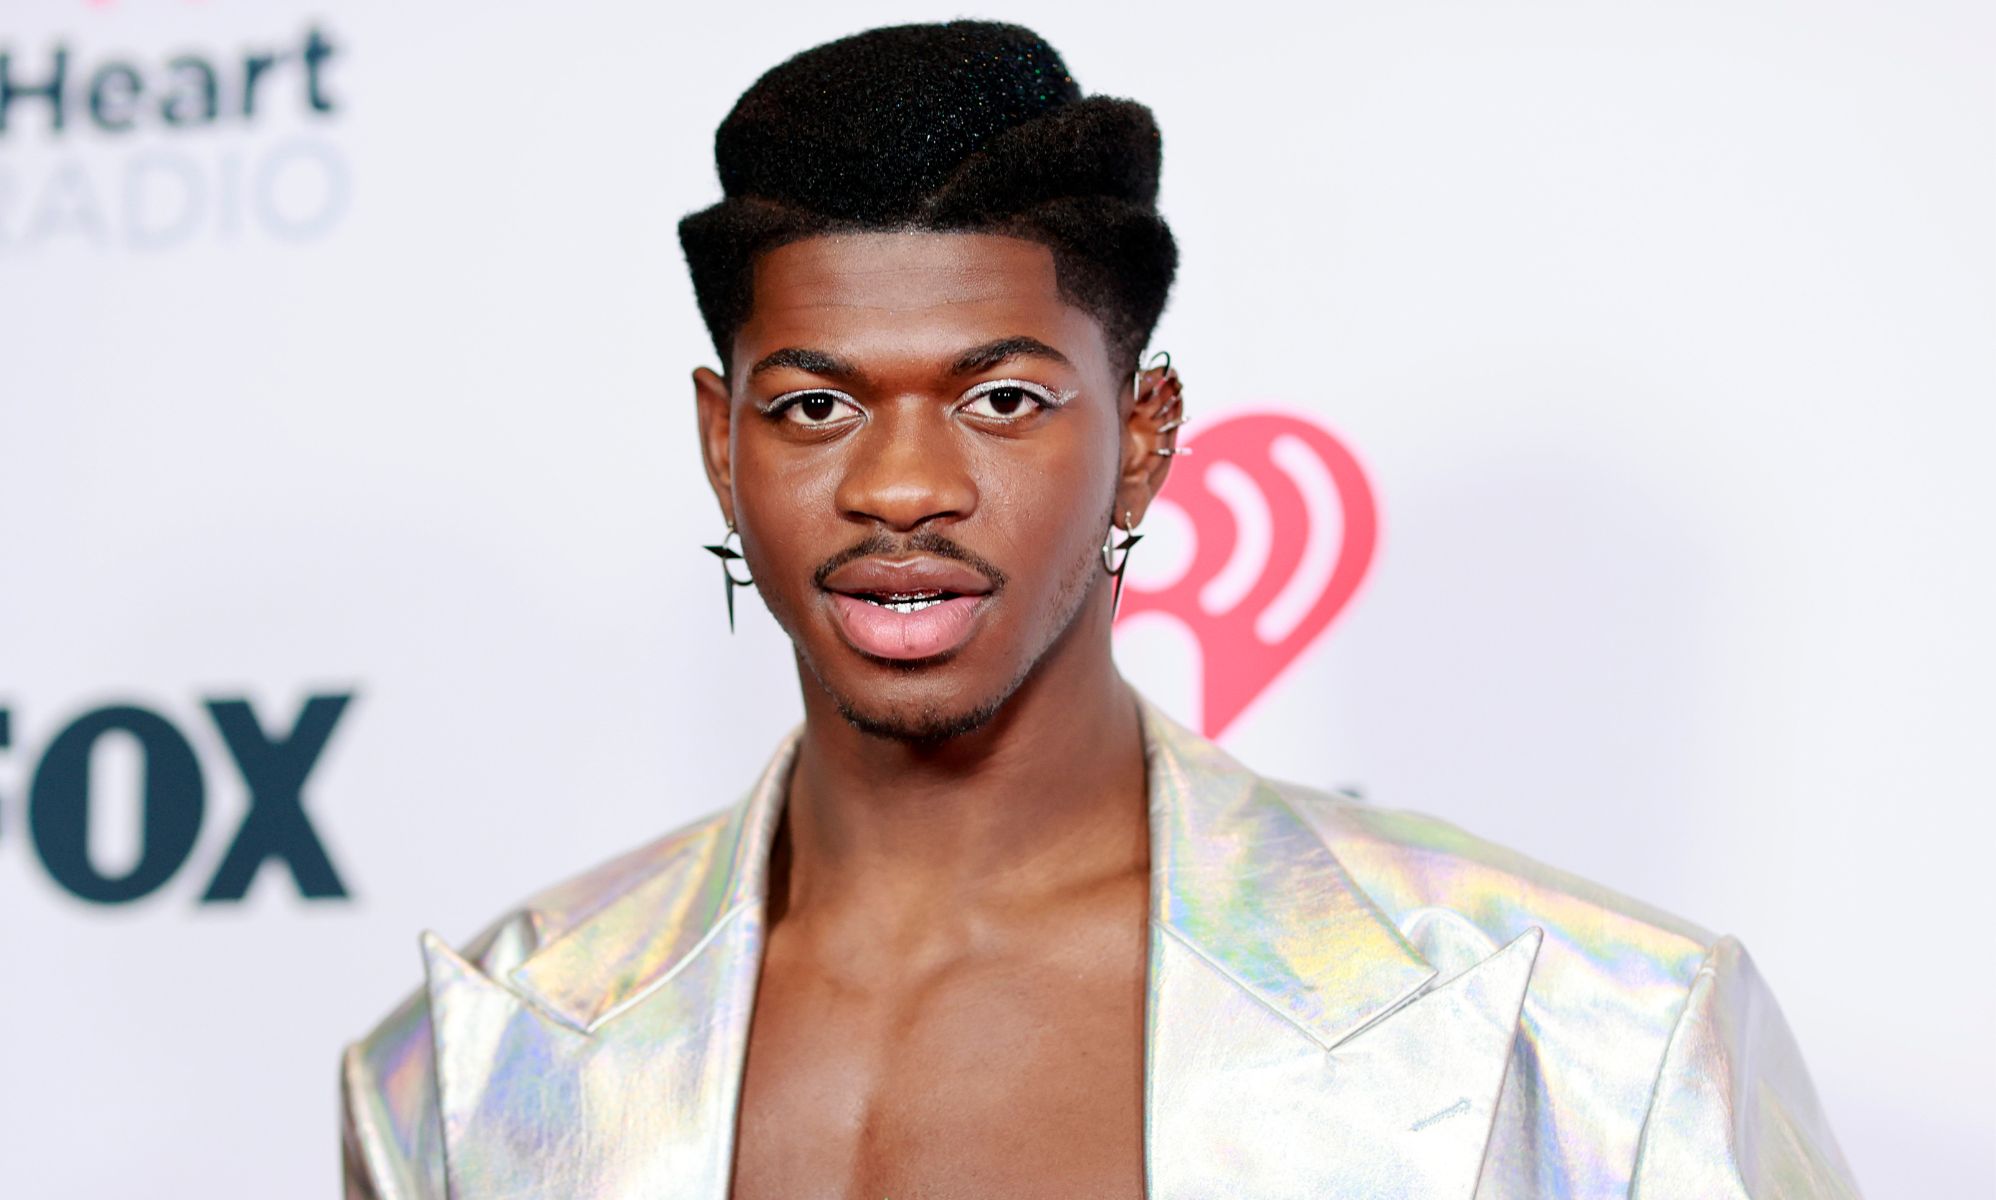 Lil nas X reacts to 'J Christ' charting at number 69